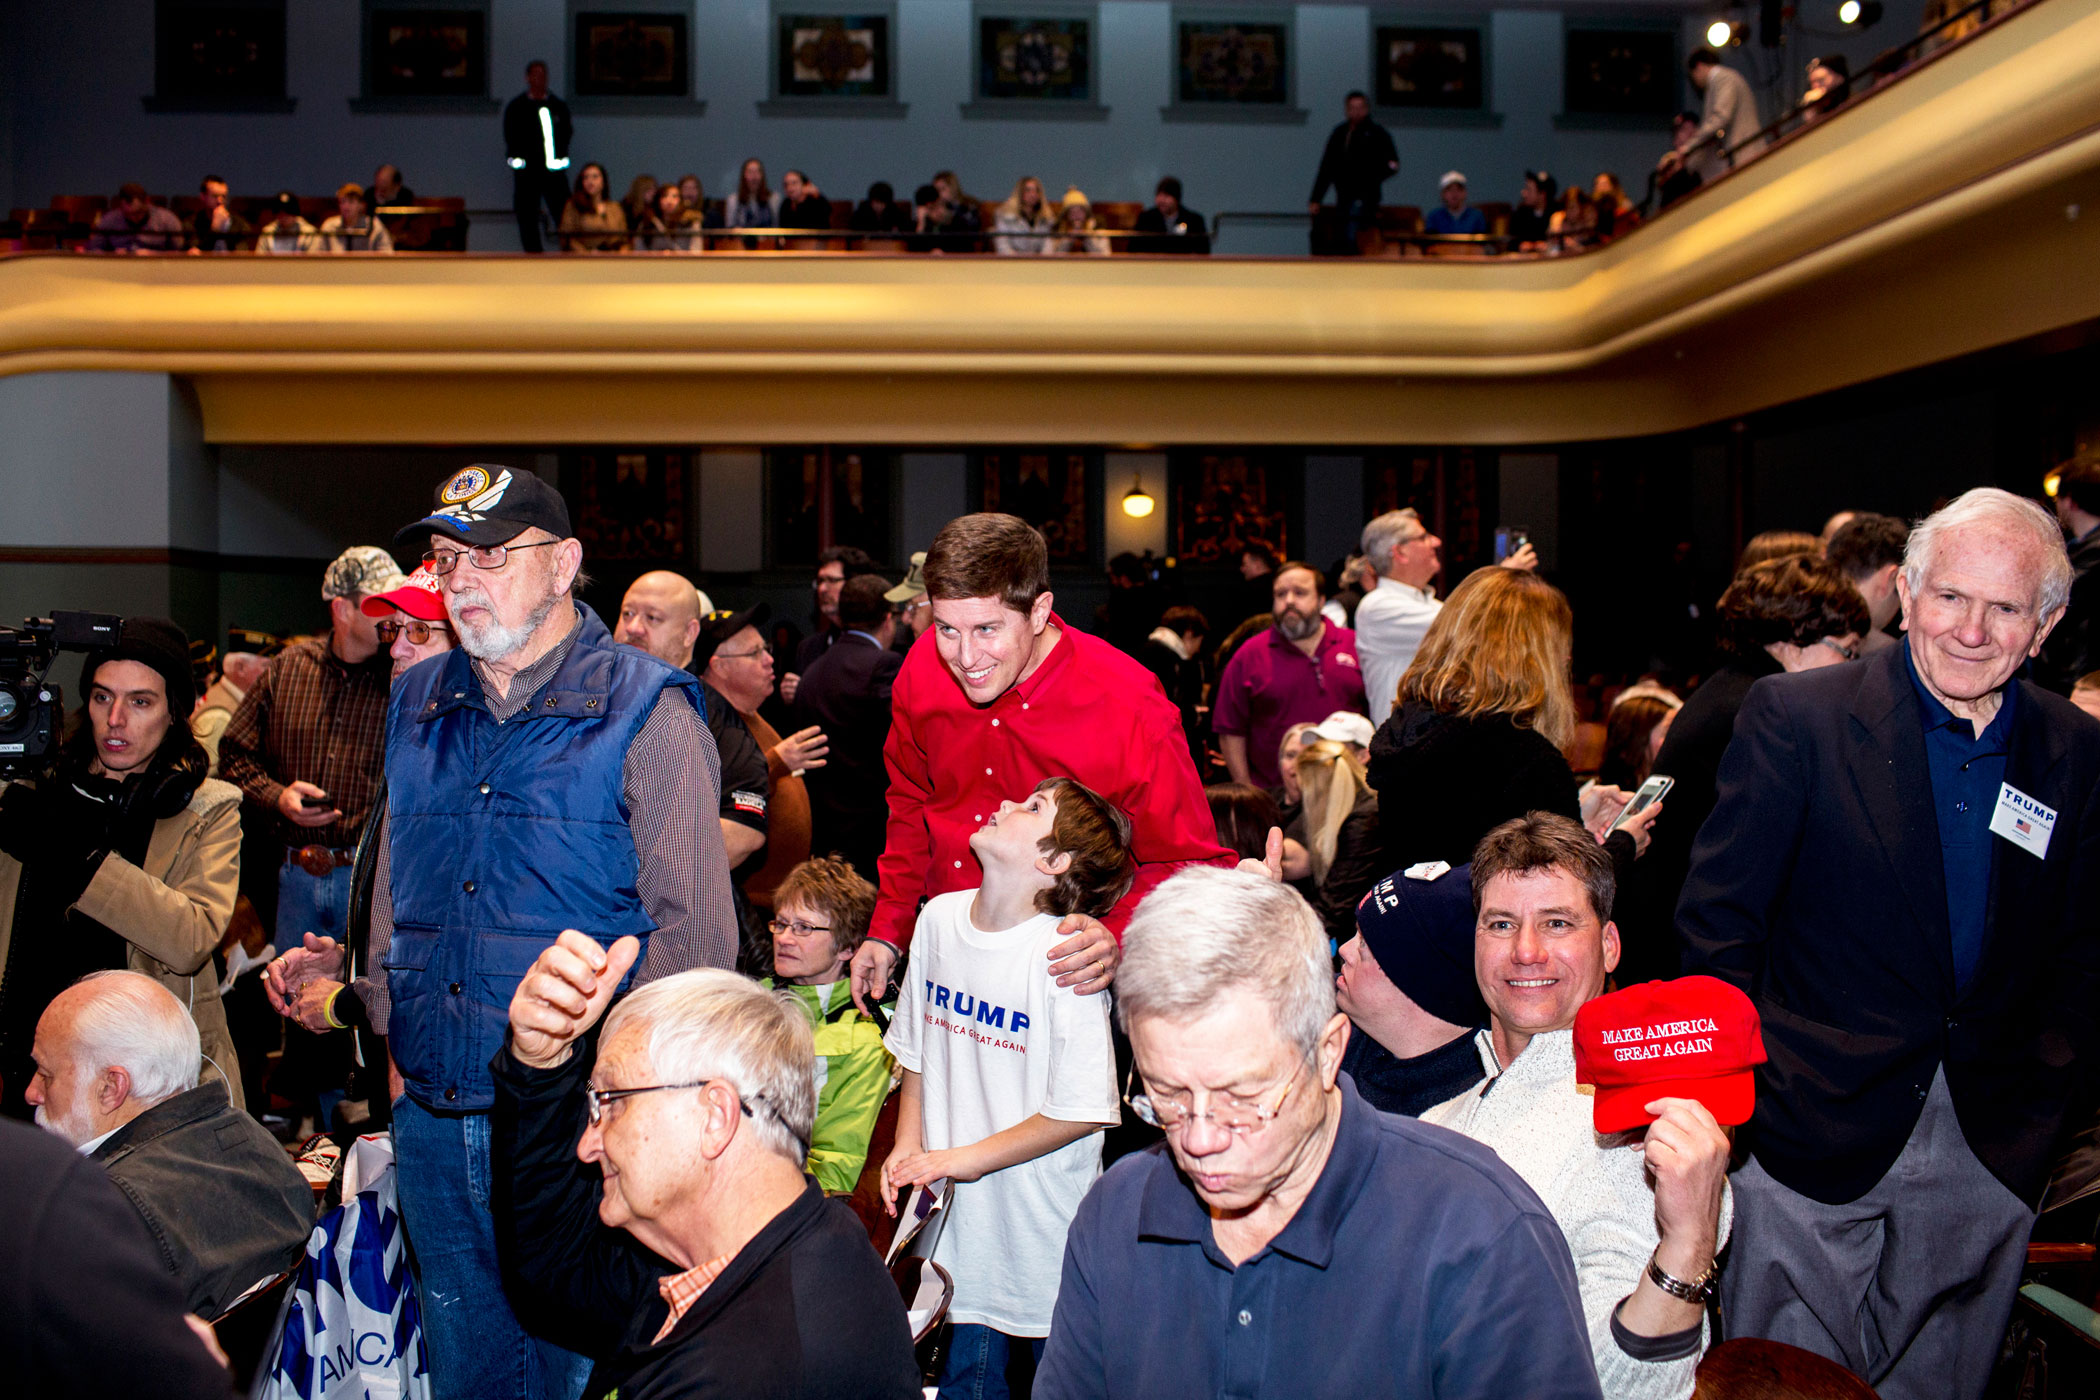 Supporters attend a campaign rally in Des Moines, Iowa on Jan. 28, 2016.